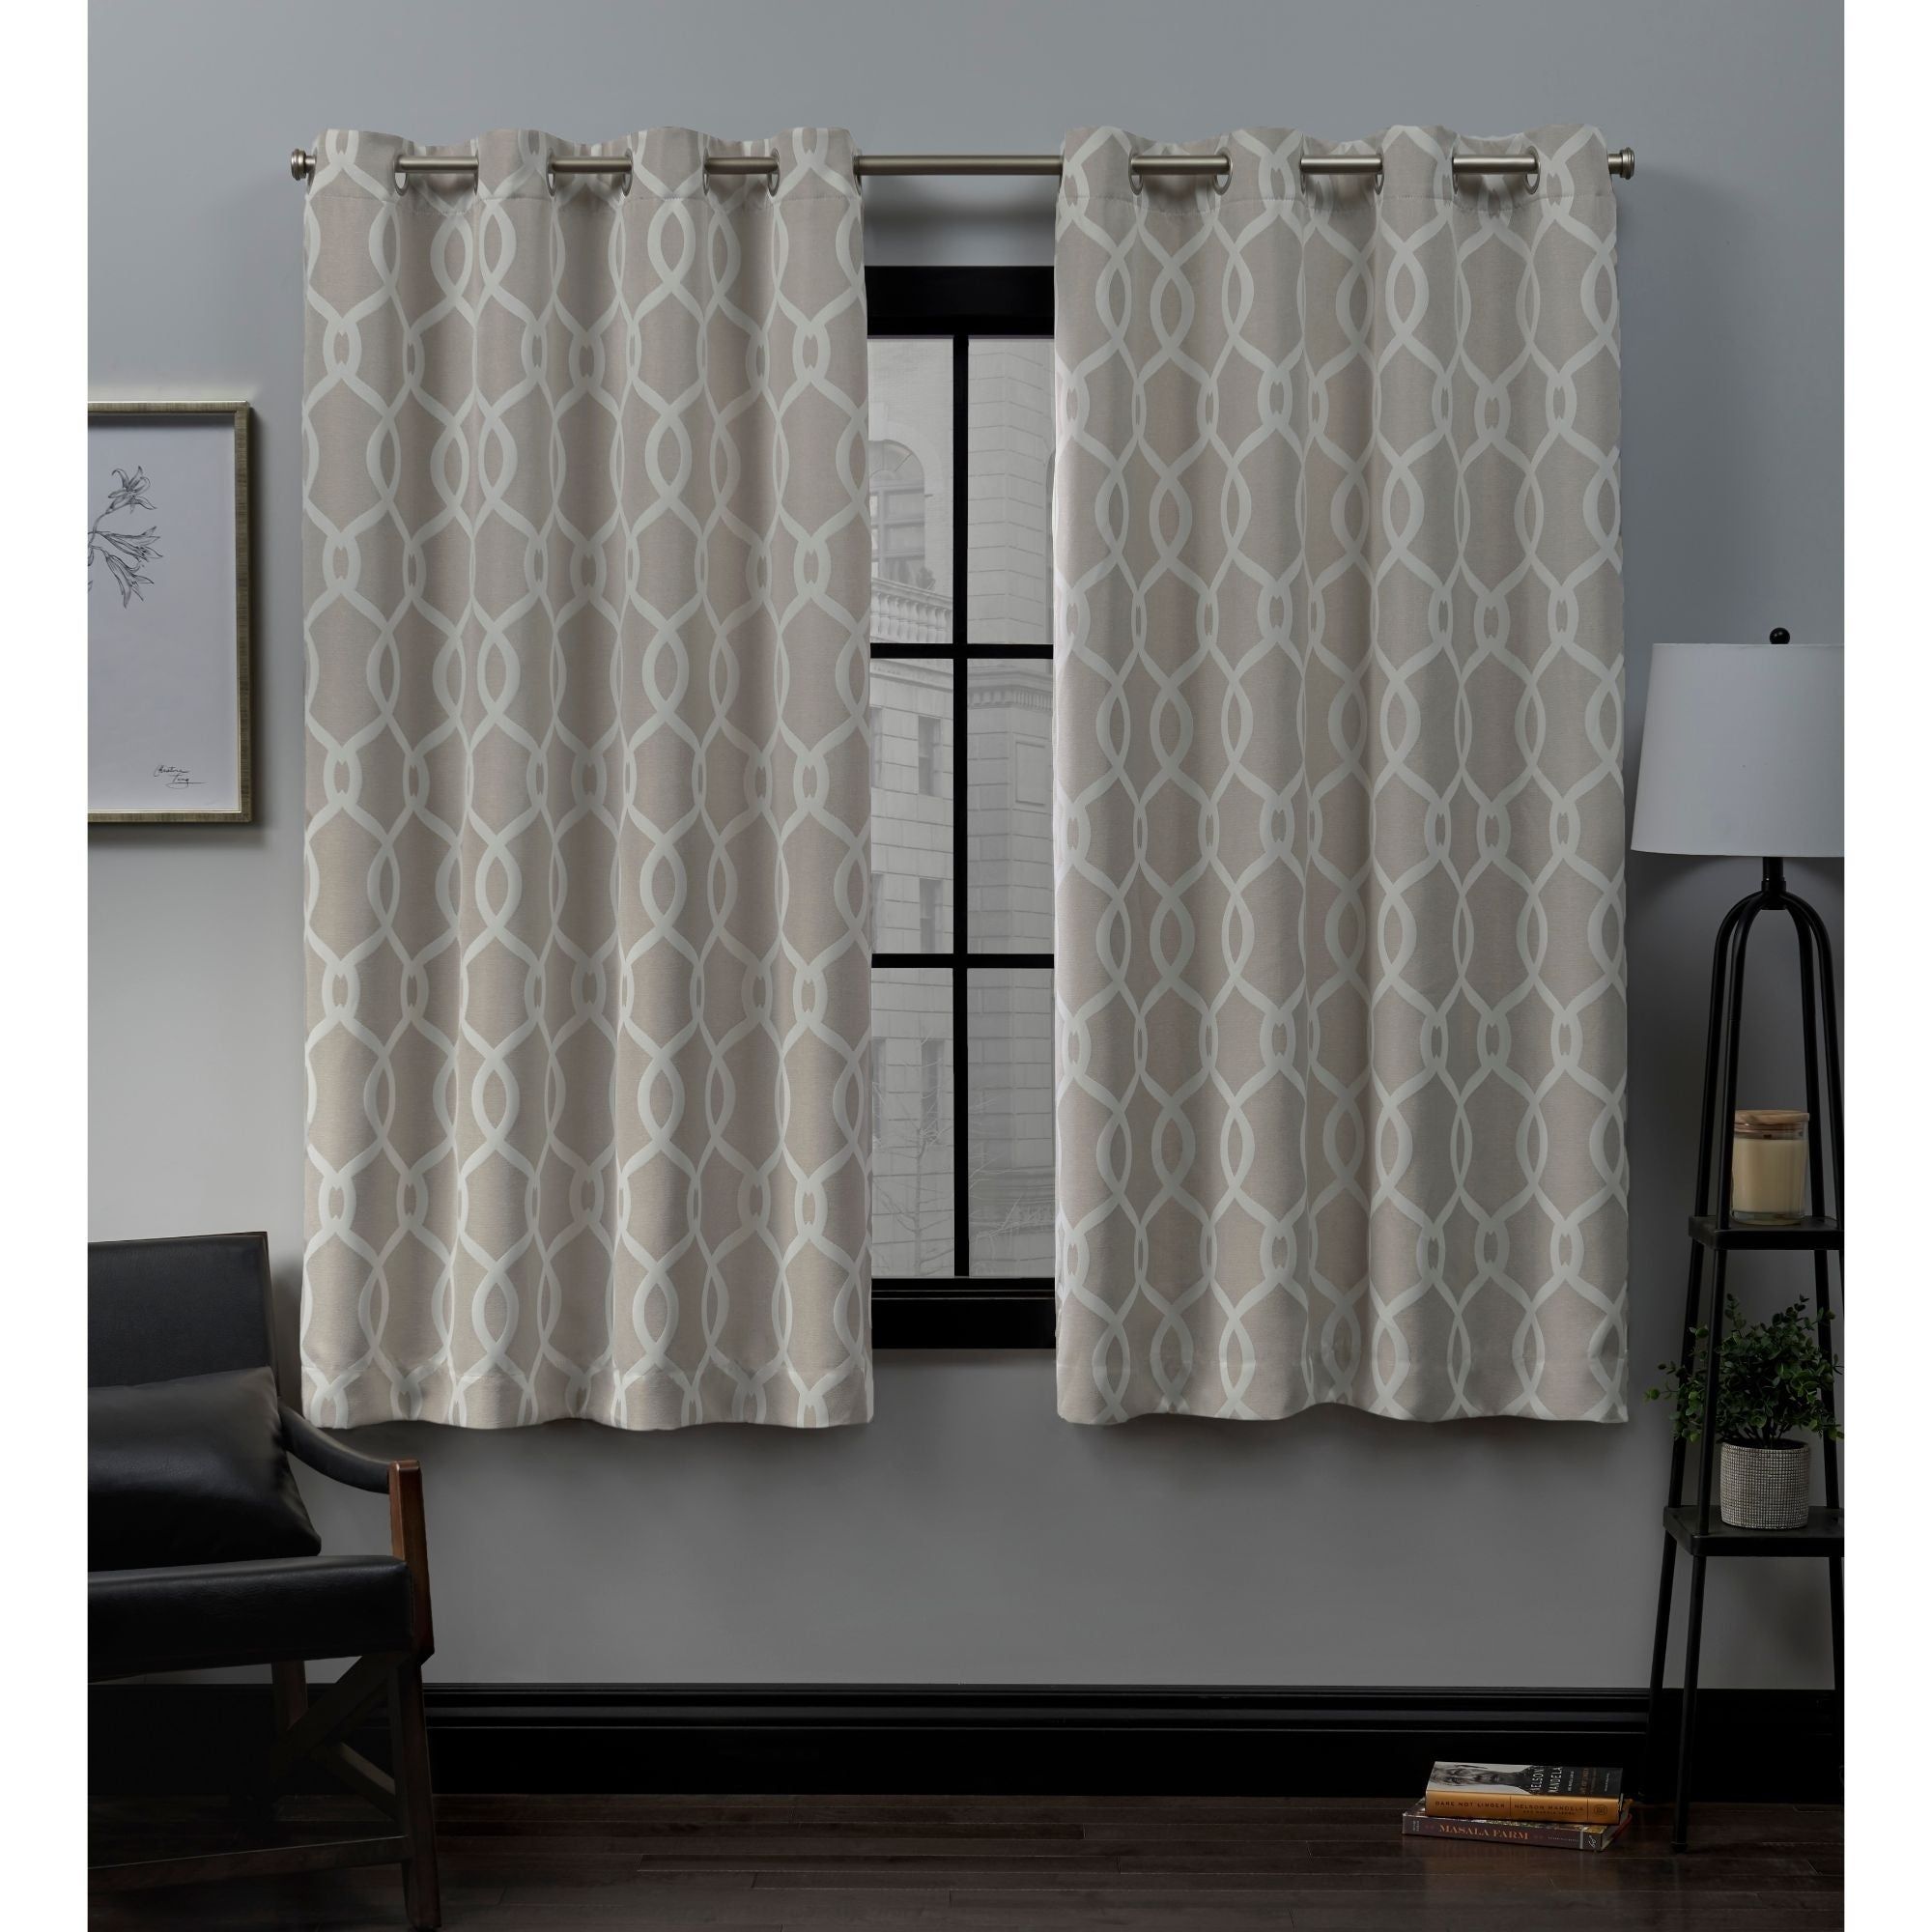 Ati Home Trilogi Woven Blackout Grommet Top Curtain Panel Pair Within Woven Blackout Curtain Panel Pairs With Grommet Top (Photo 1 of 30)